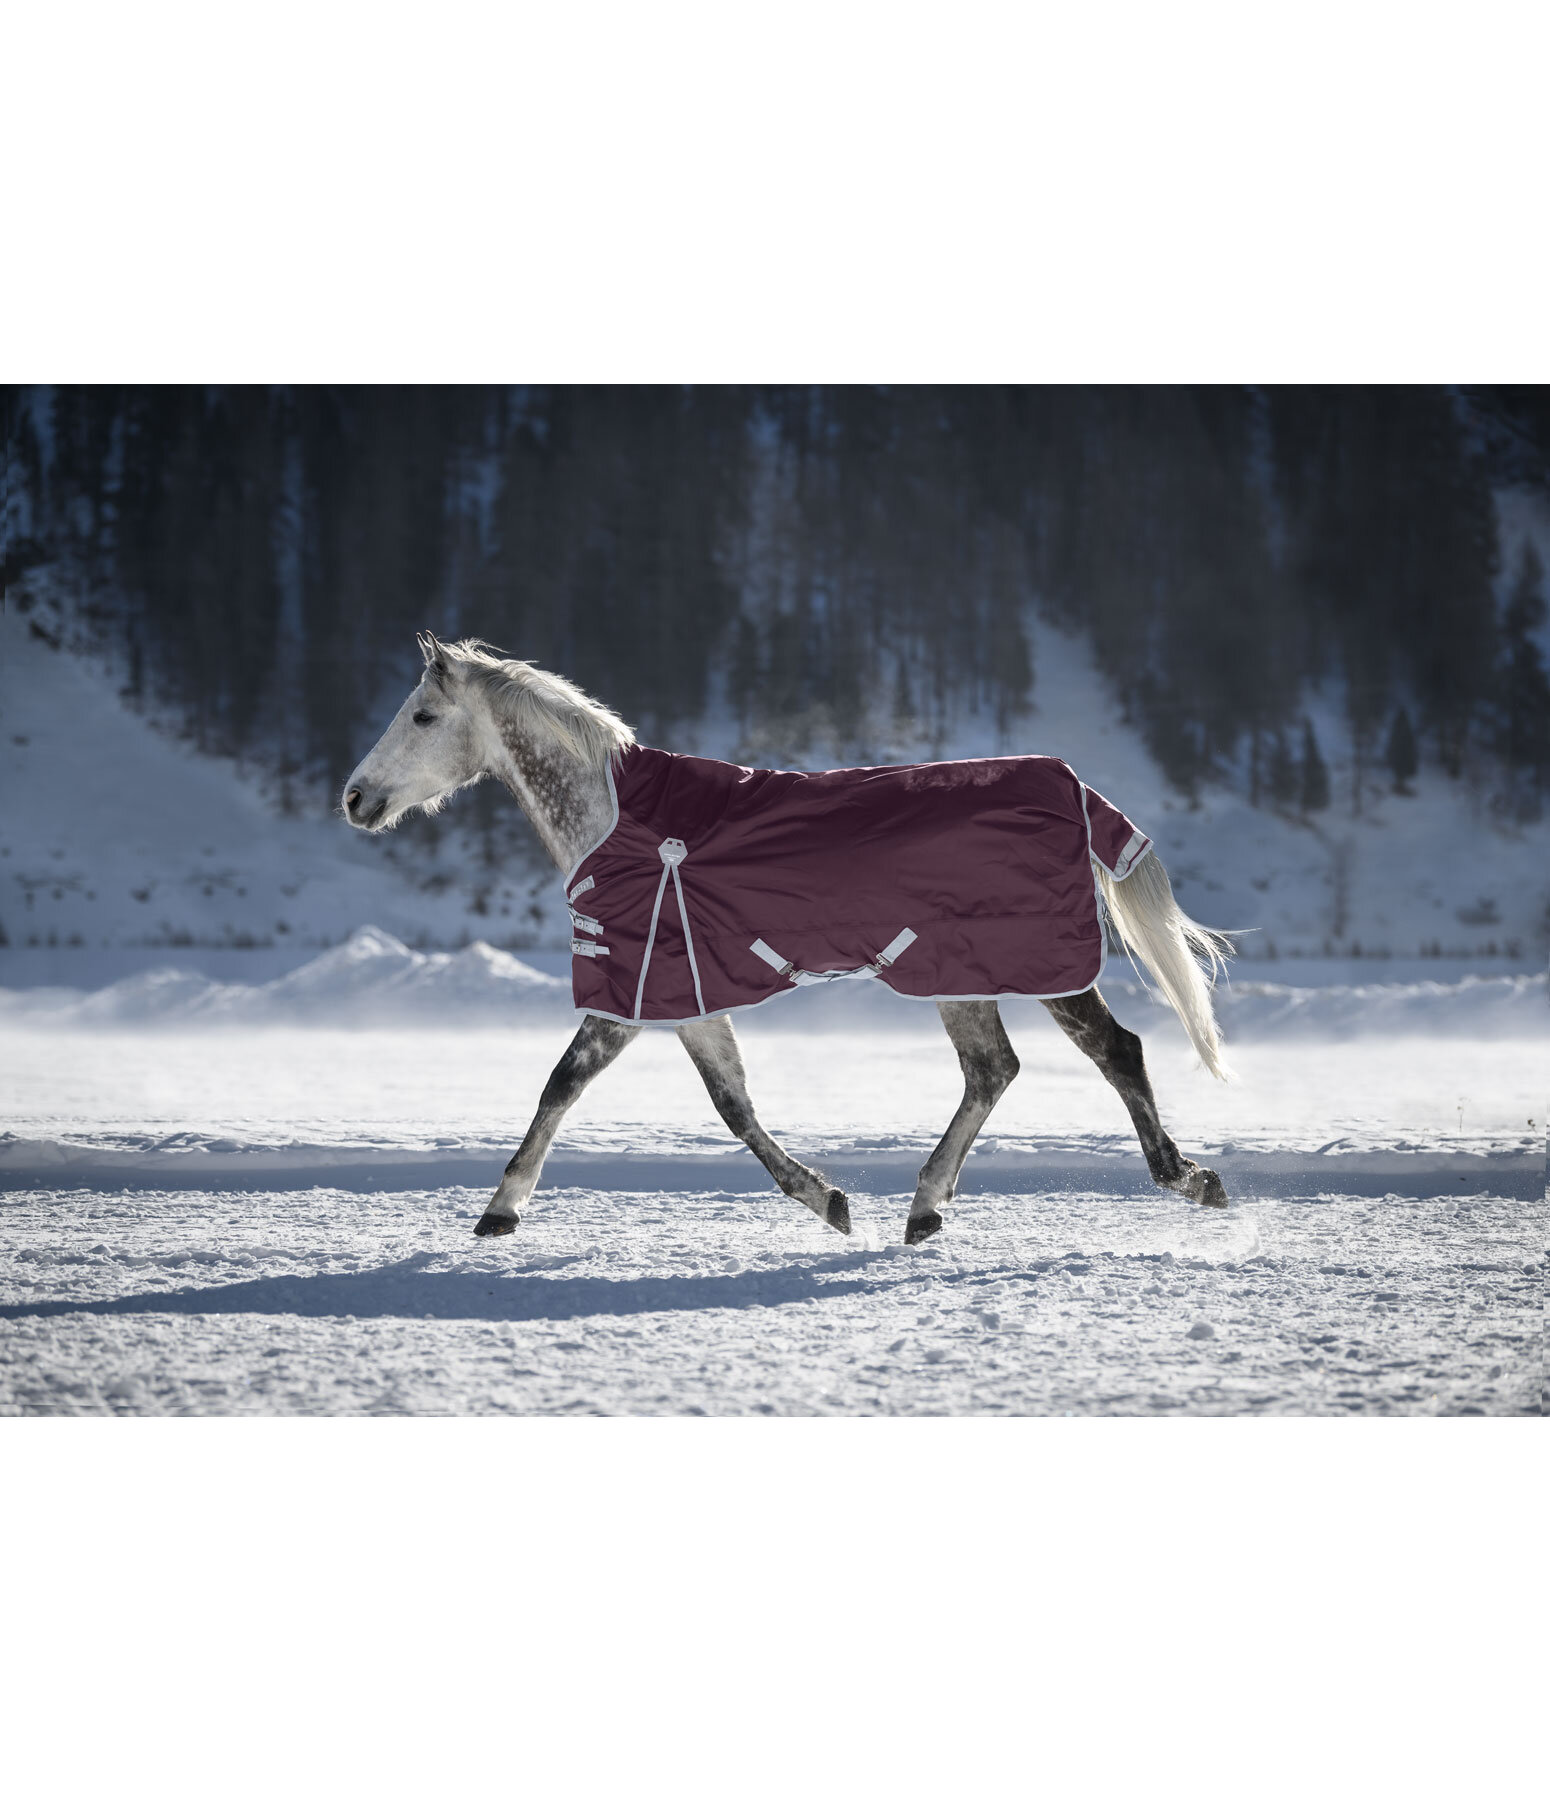 High Neck Turnout Rug Perfect Fit, 200g